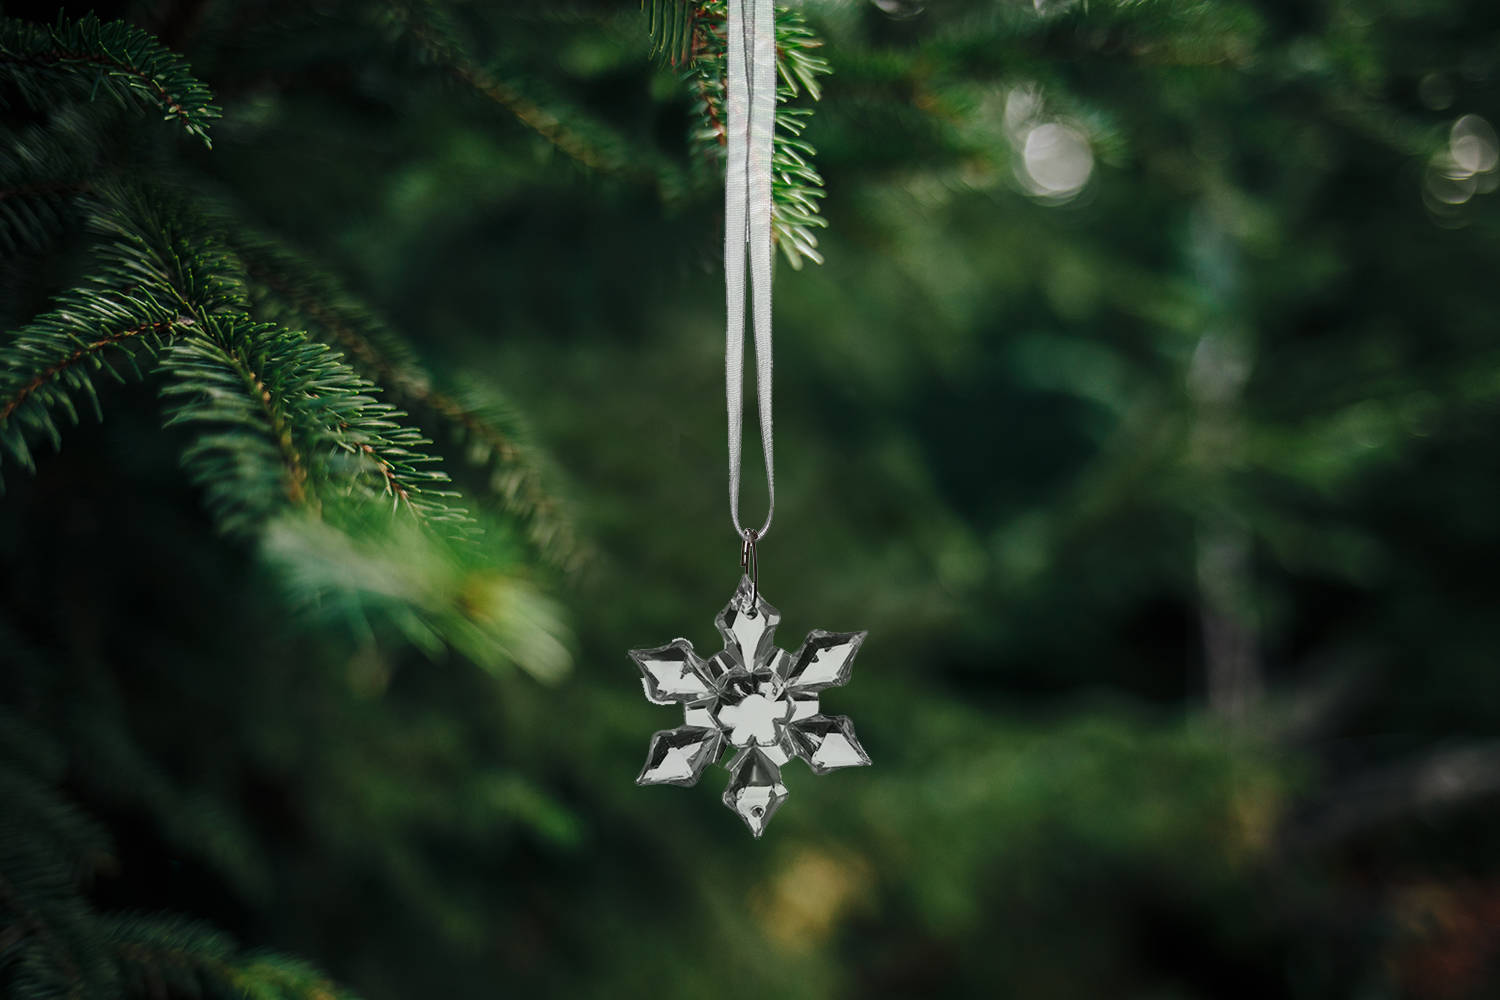 Closeup of a wooden snowflake-shaped Christmas ornament on a pine tree